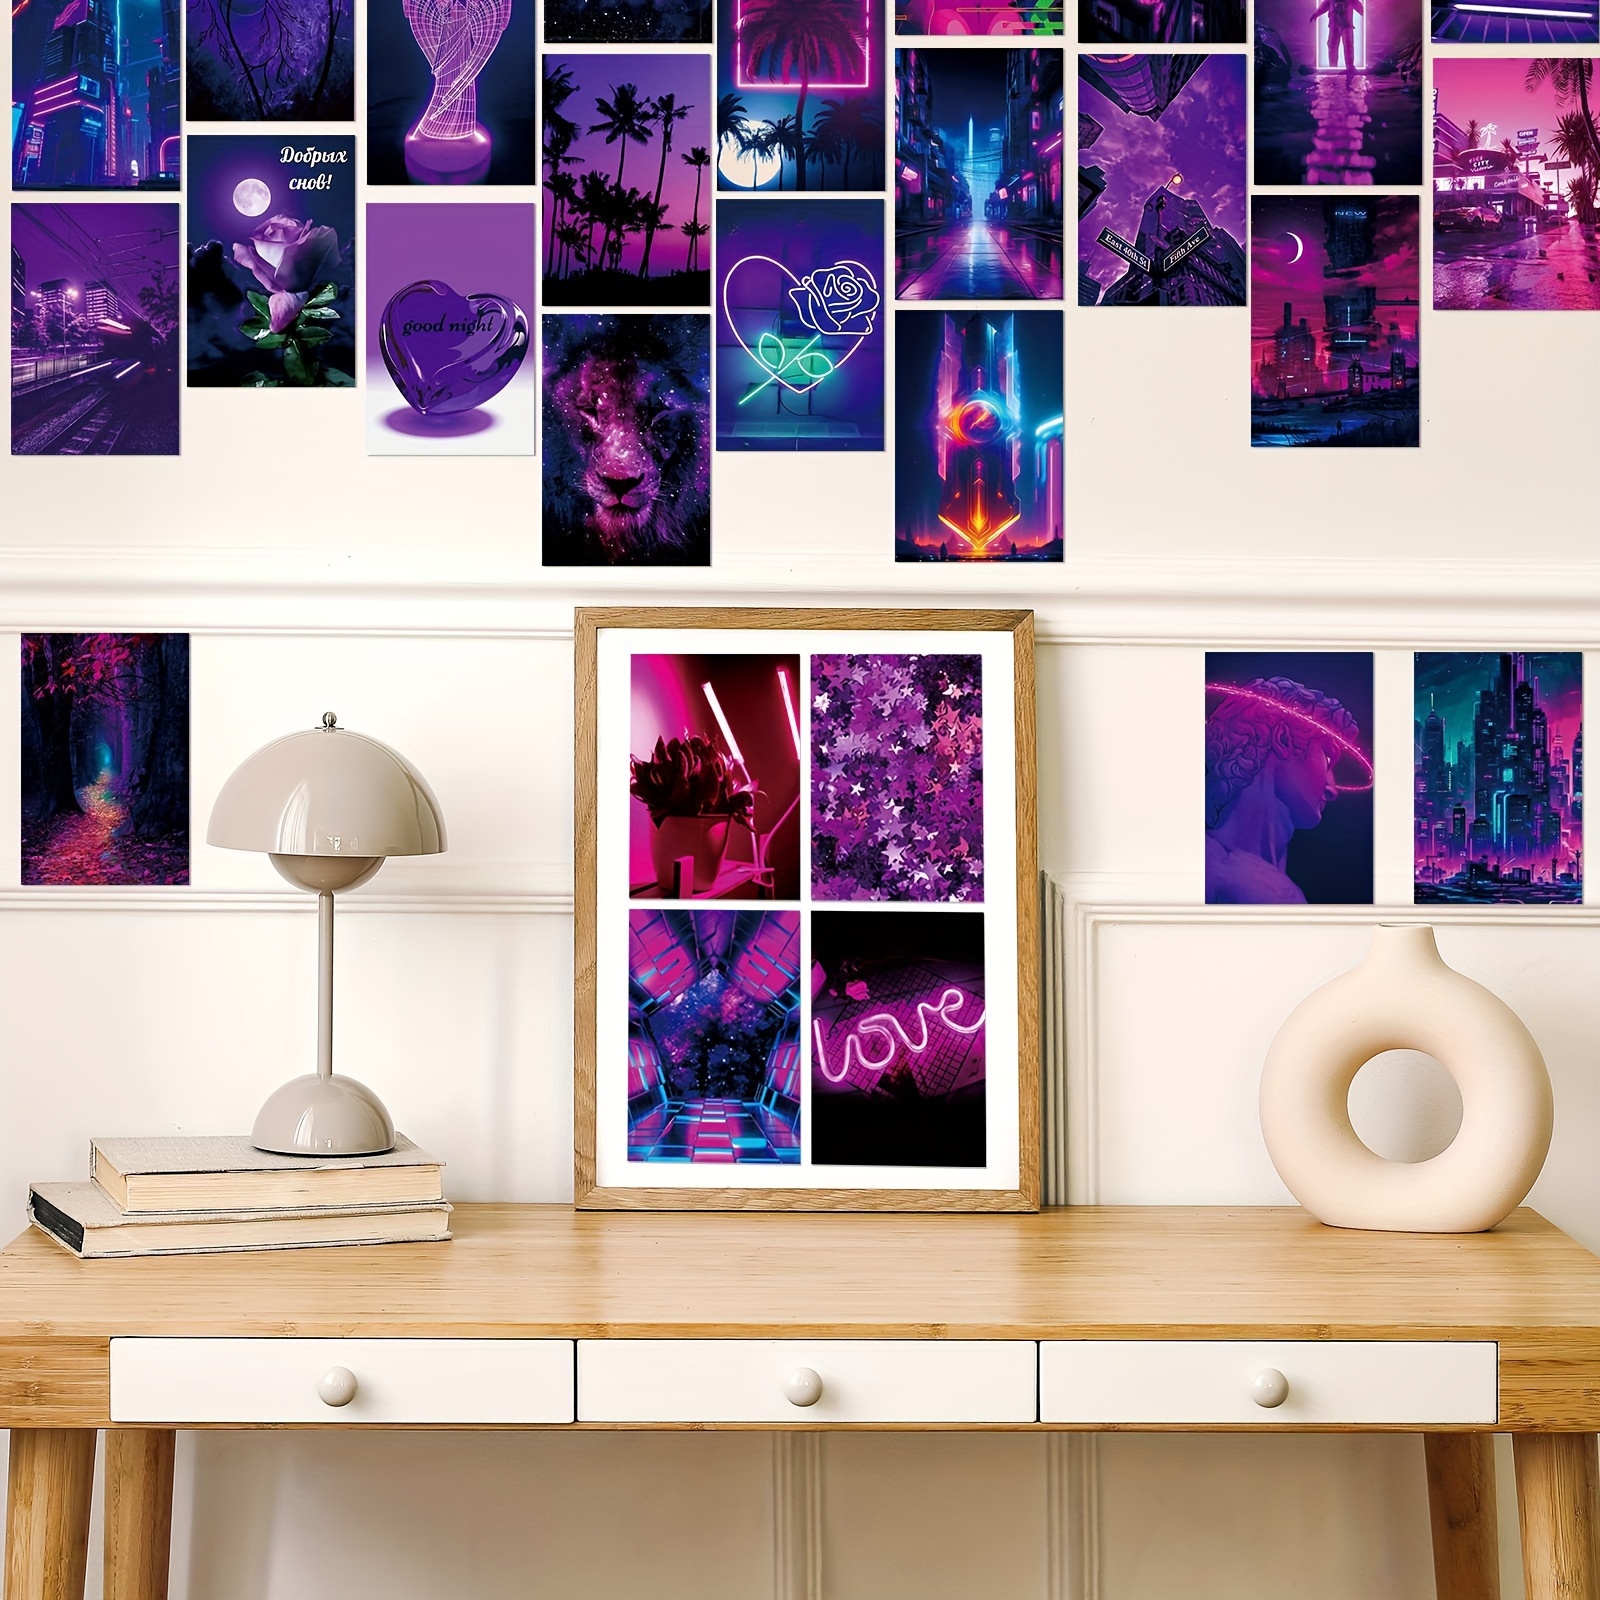  60 PCS Aesthetic Room Decor Retro Wall Collage Kit Records  Picture for Dorm Bedroom 80s 90s Art Girl Teens Women Vintage Posters Indie  Photo: Posters & Prints